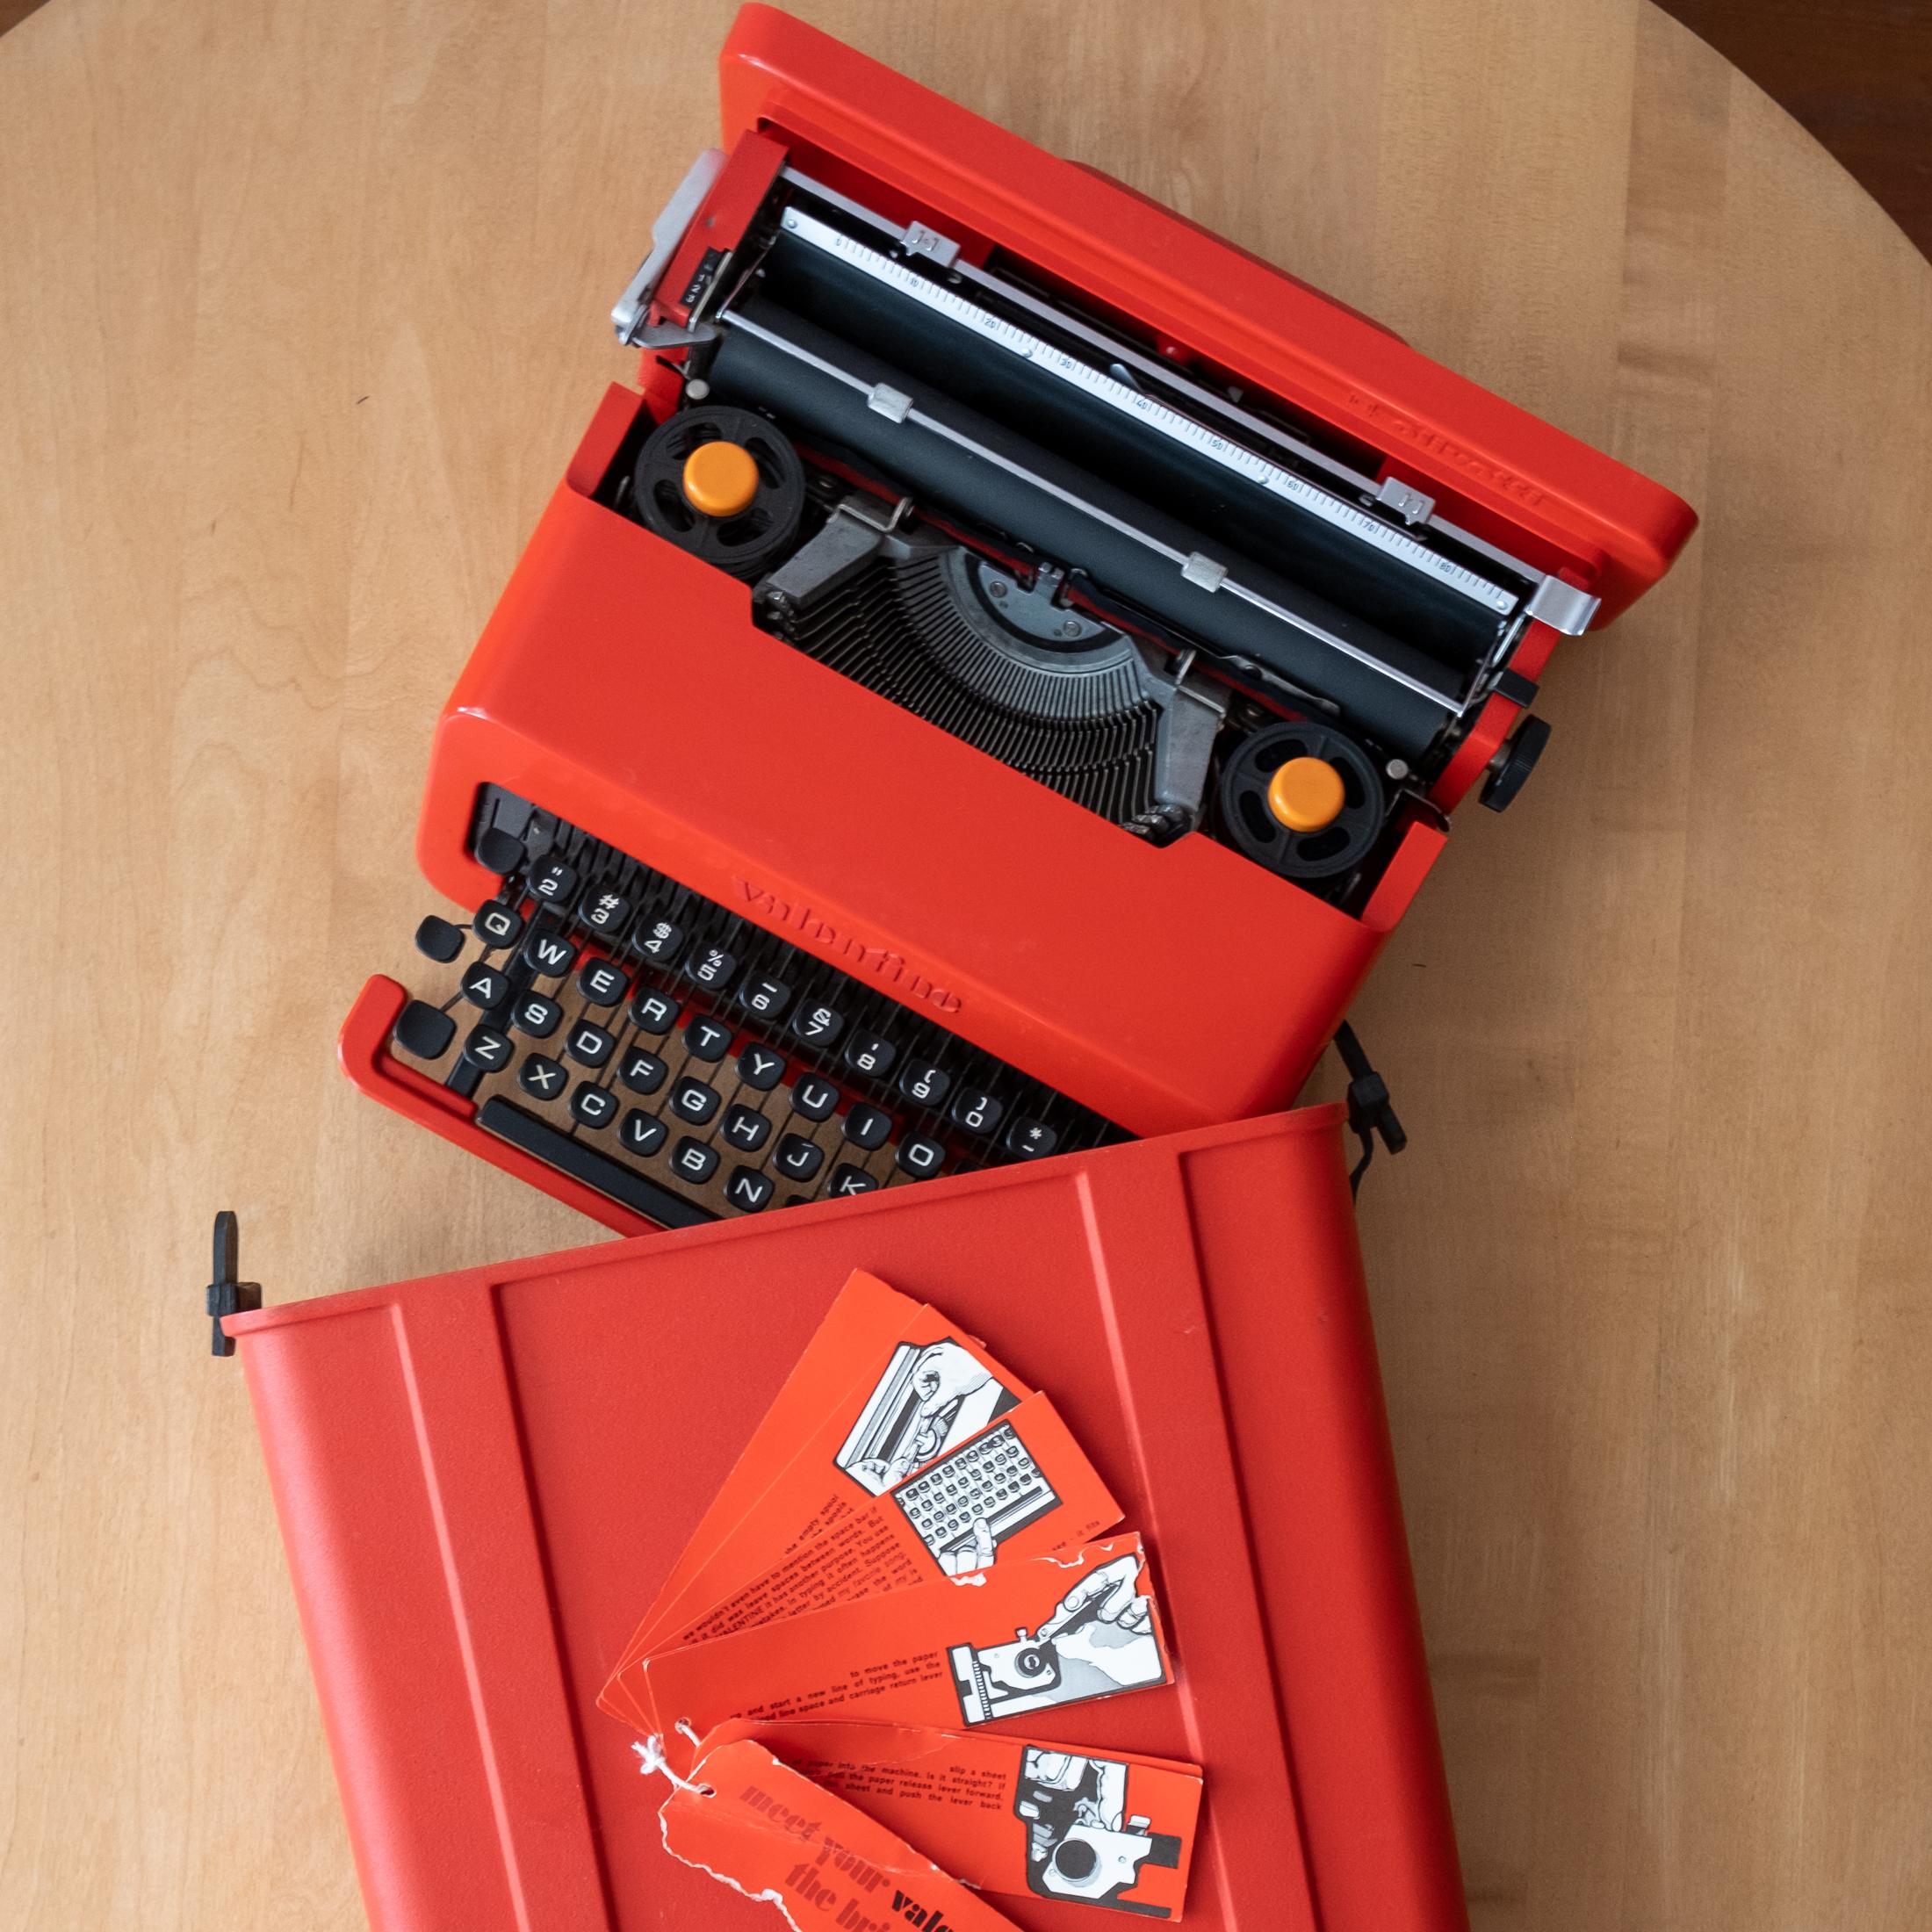 Olivetti valentine typewriter by Ettore Sottsass & Perry King, designed in 1968 for Olivetti. Very clean condition in perfect working order with a new ribbon. Recently serviced. 

Included with this icon of Industrial Design is a rare original